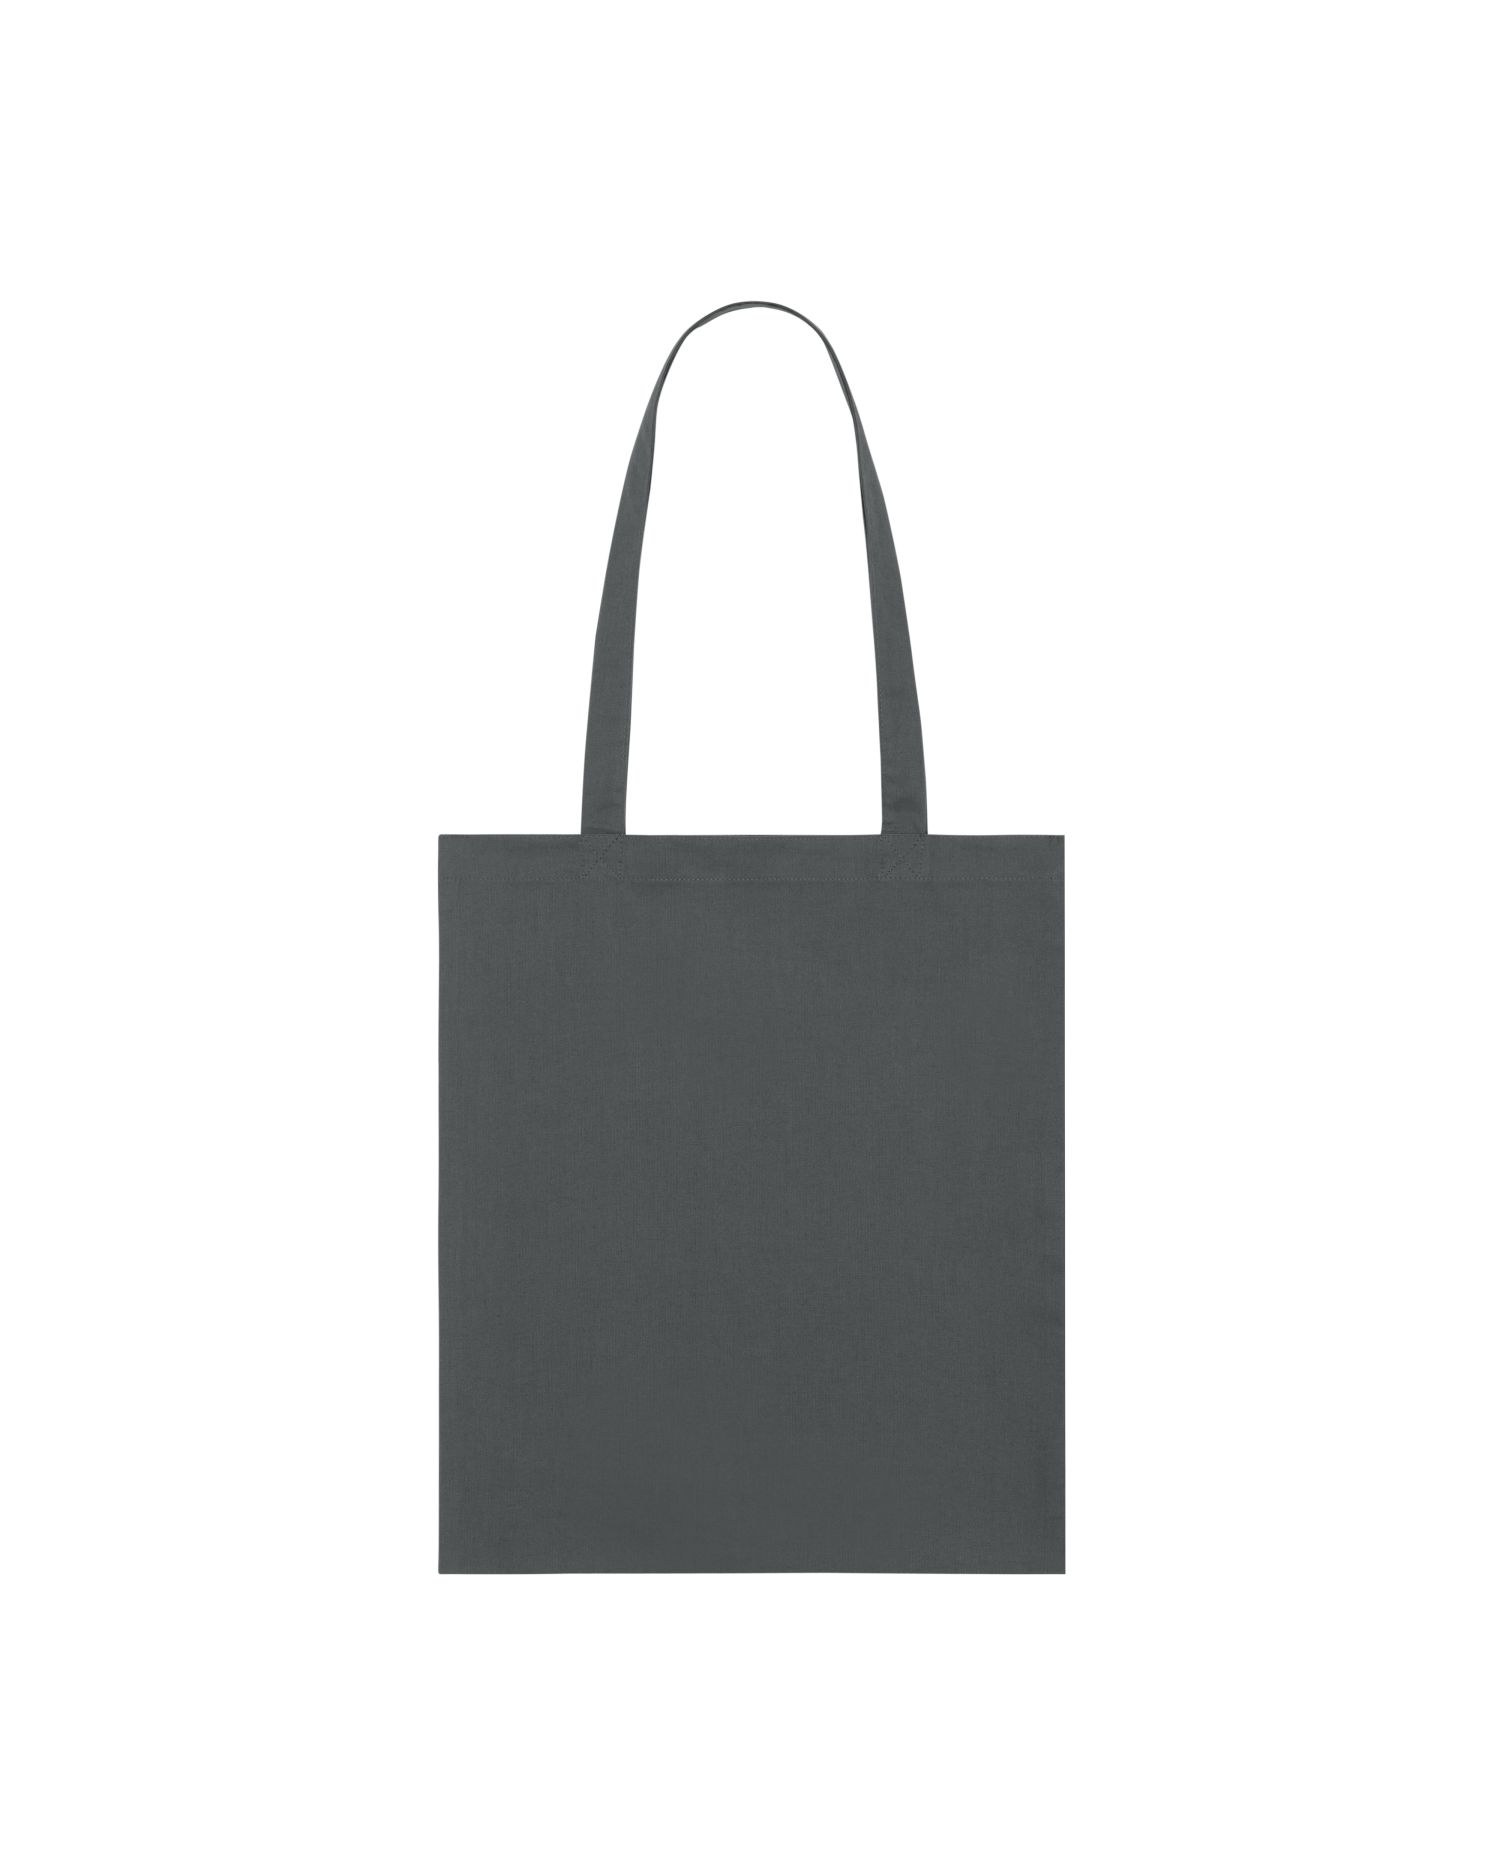  Light Tote Bag in Farbe Anthracite